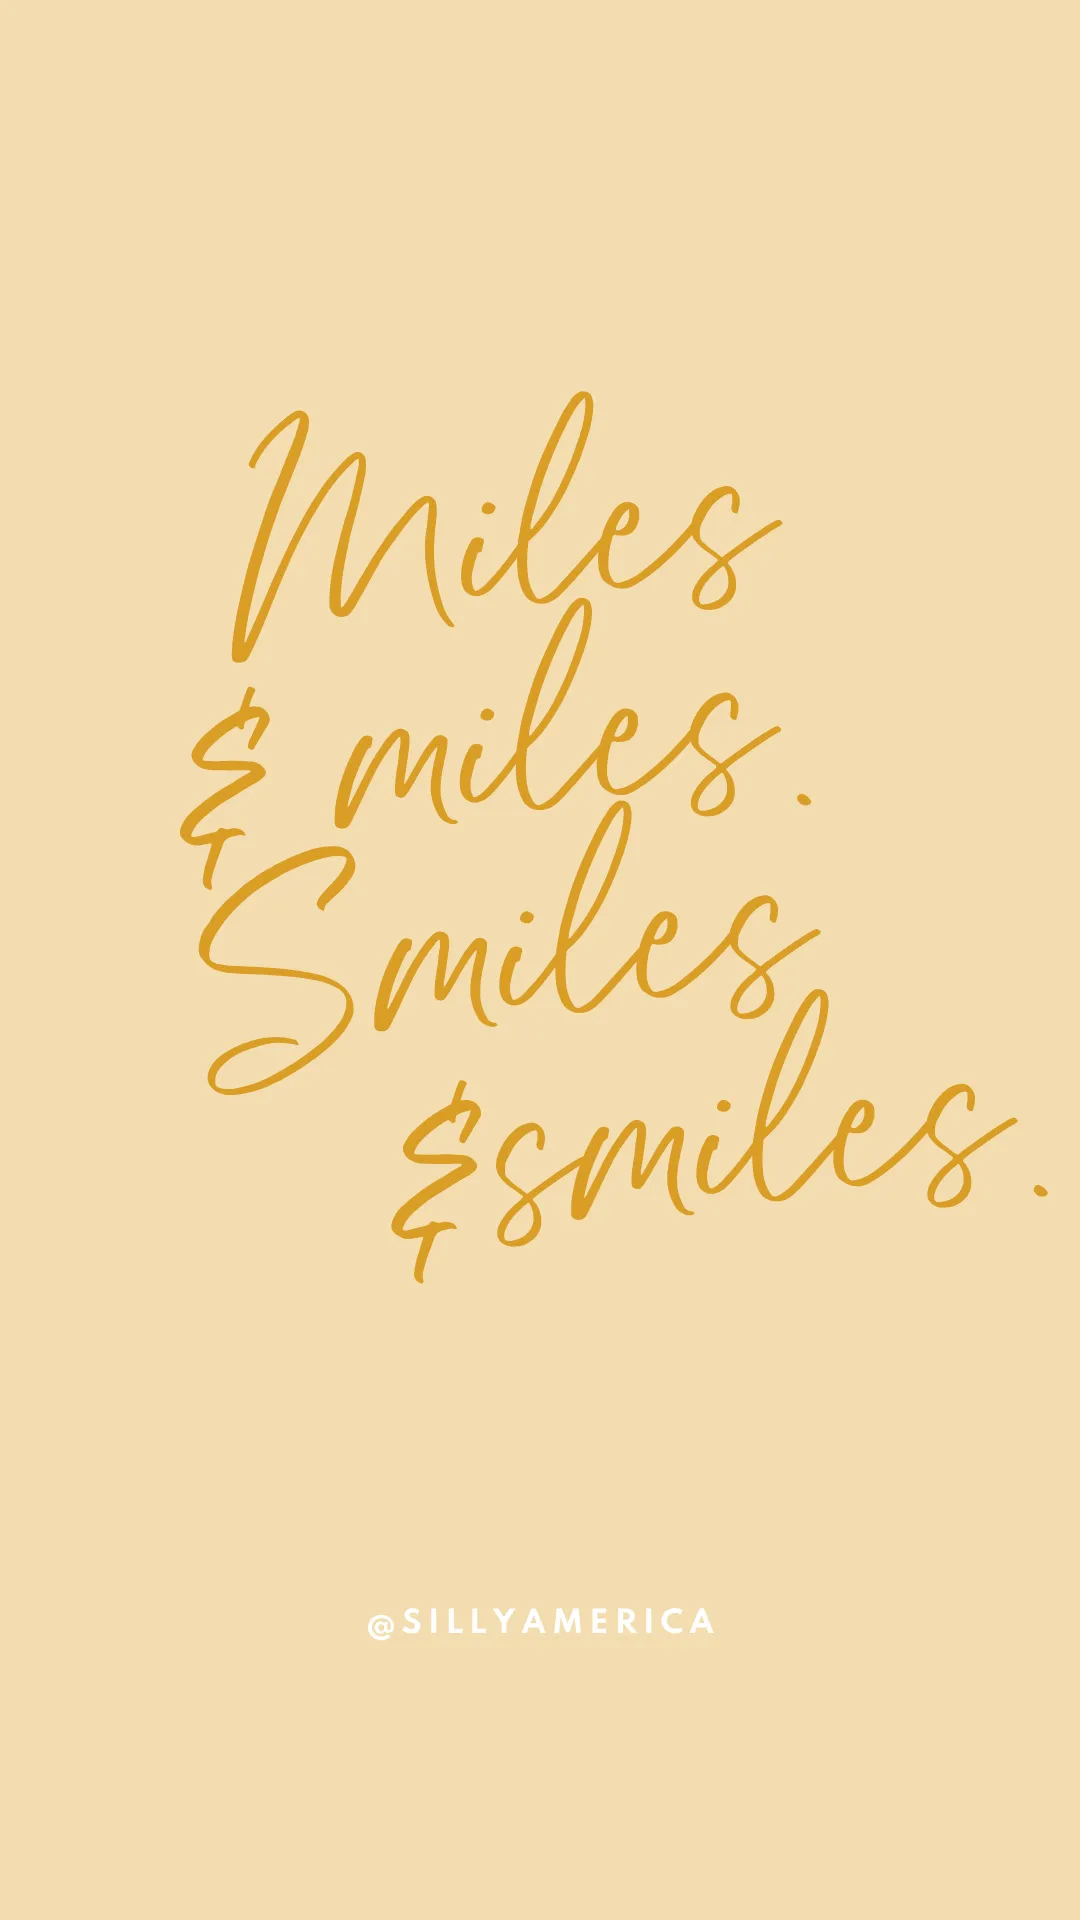 Miles and miles. Smiles and smiles. - Road Trip Captions for Instagram